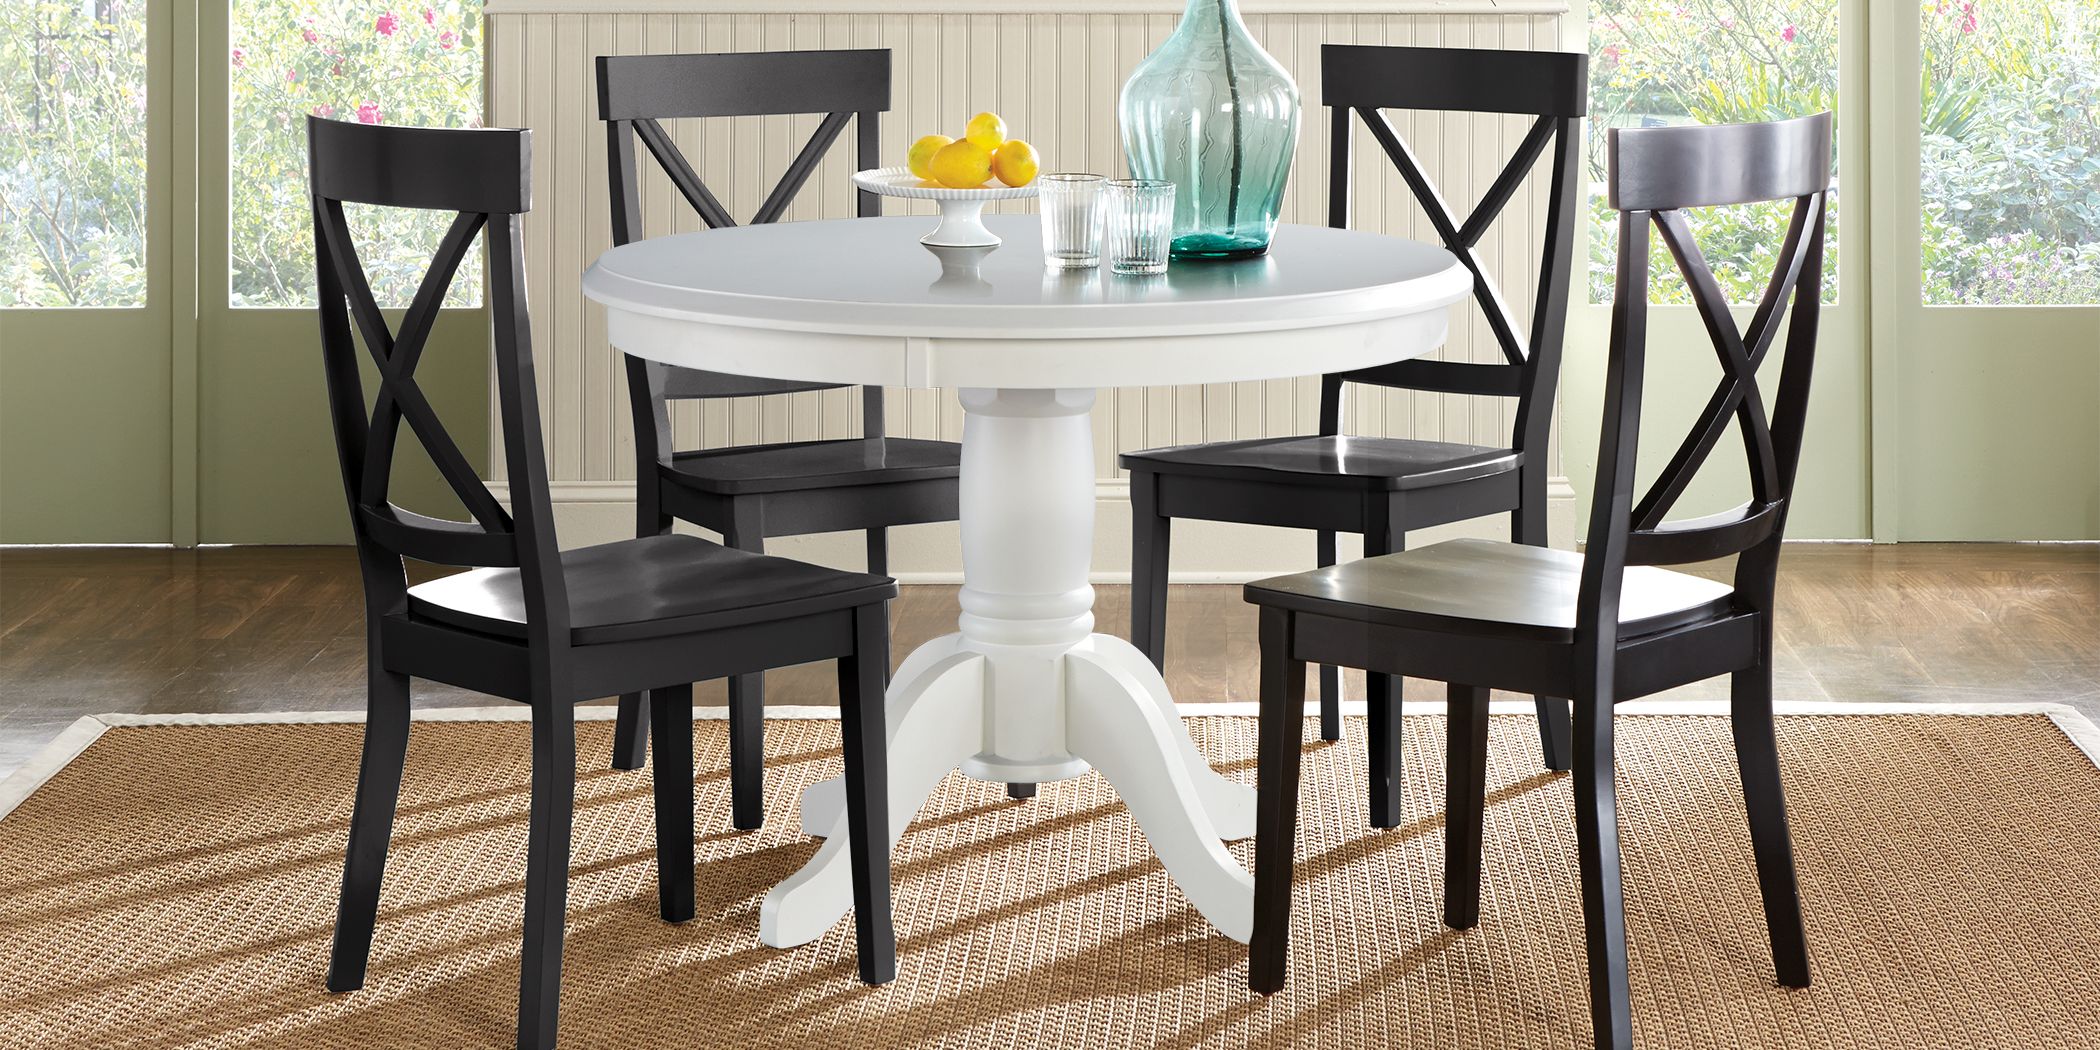 Rooms To Go Brynwood Dining Set Off 62, Rooms To Go Furniture Dining Room Sets